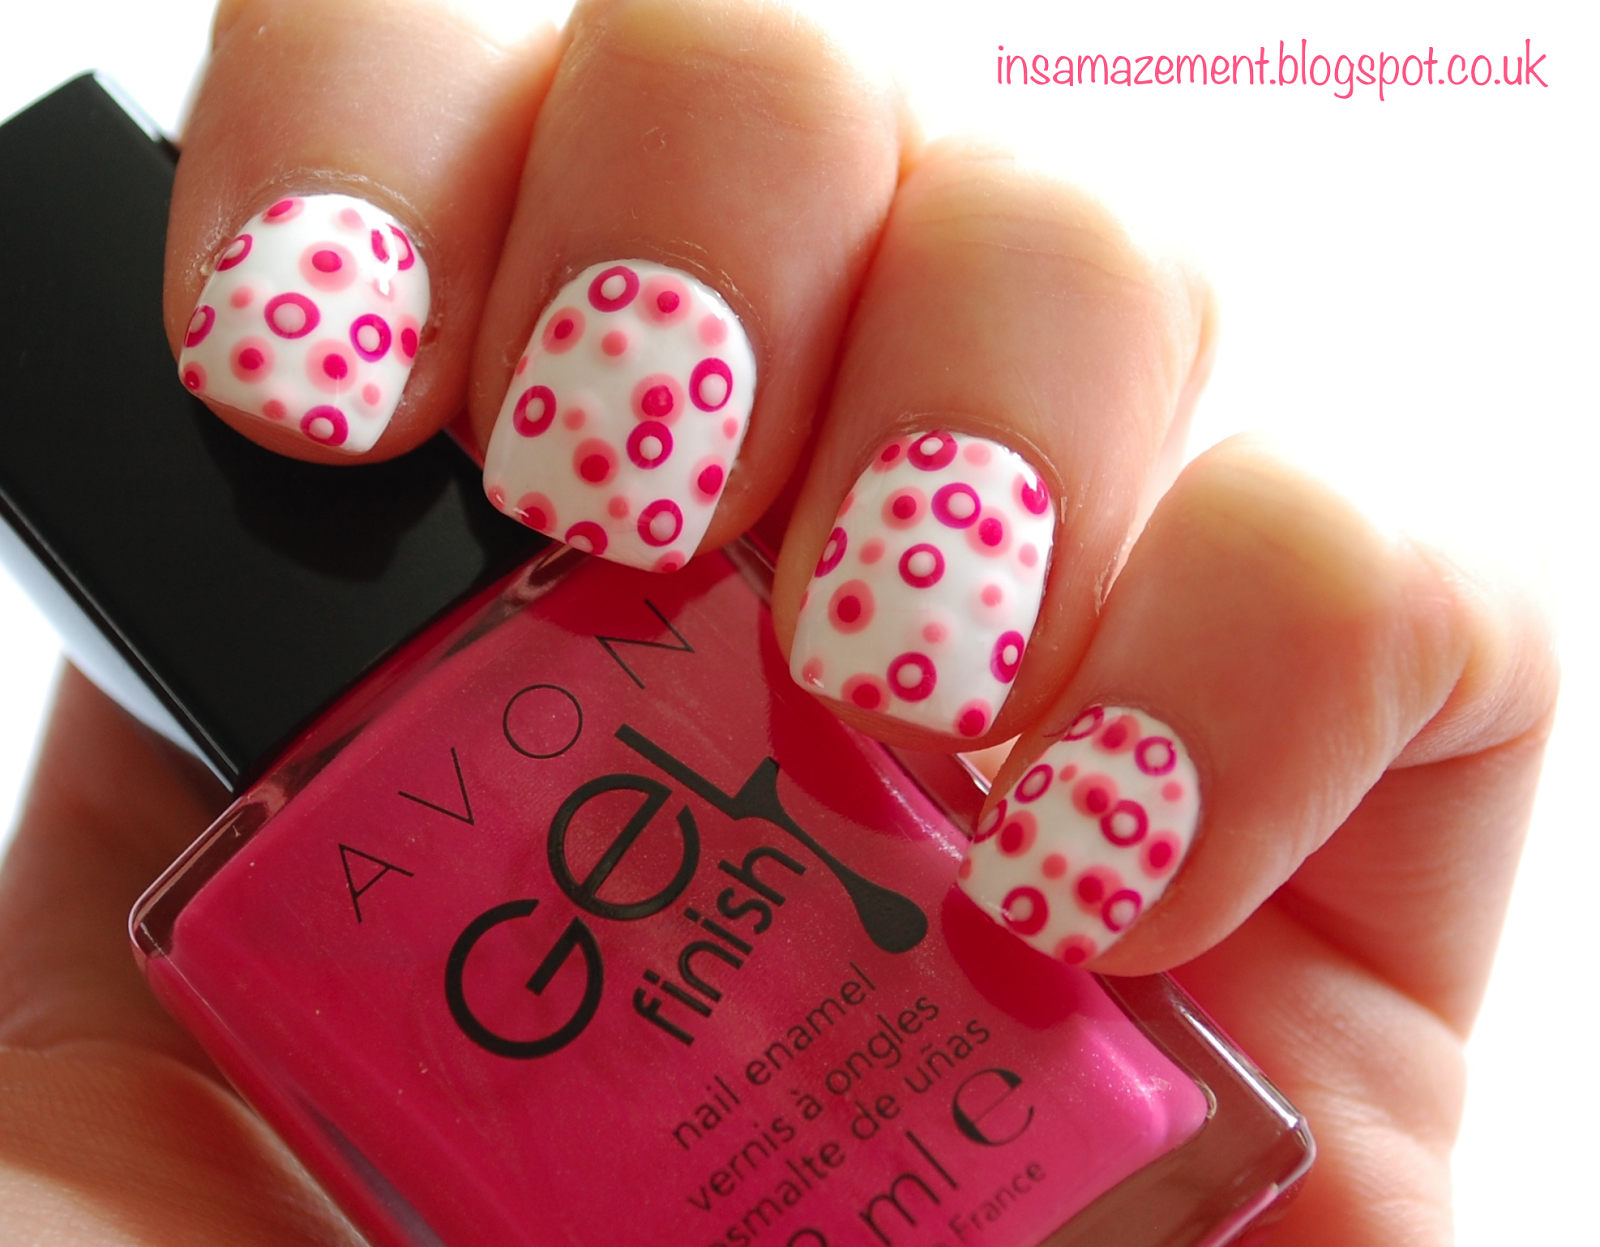 2. Middle Dot Nail Art - wide 6